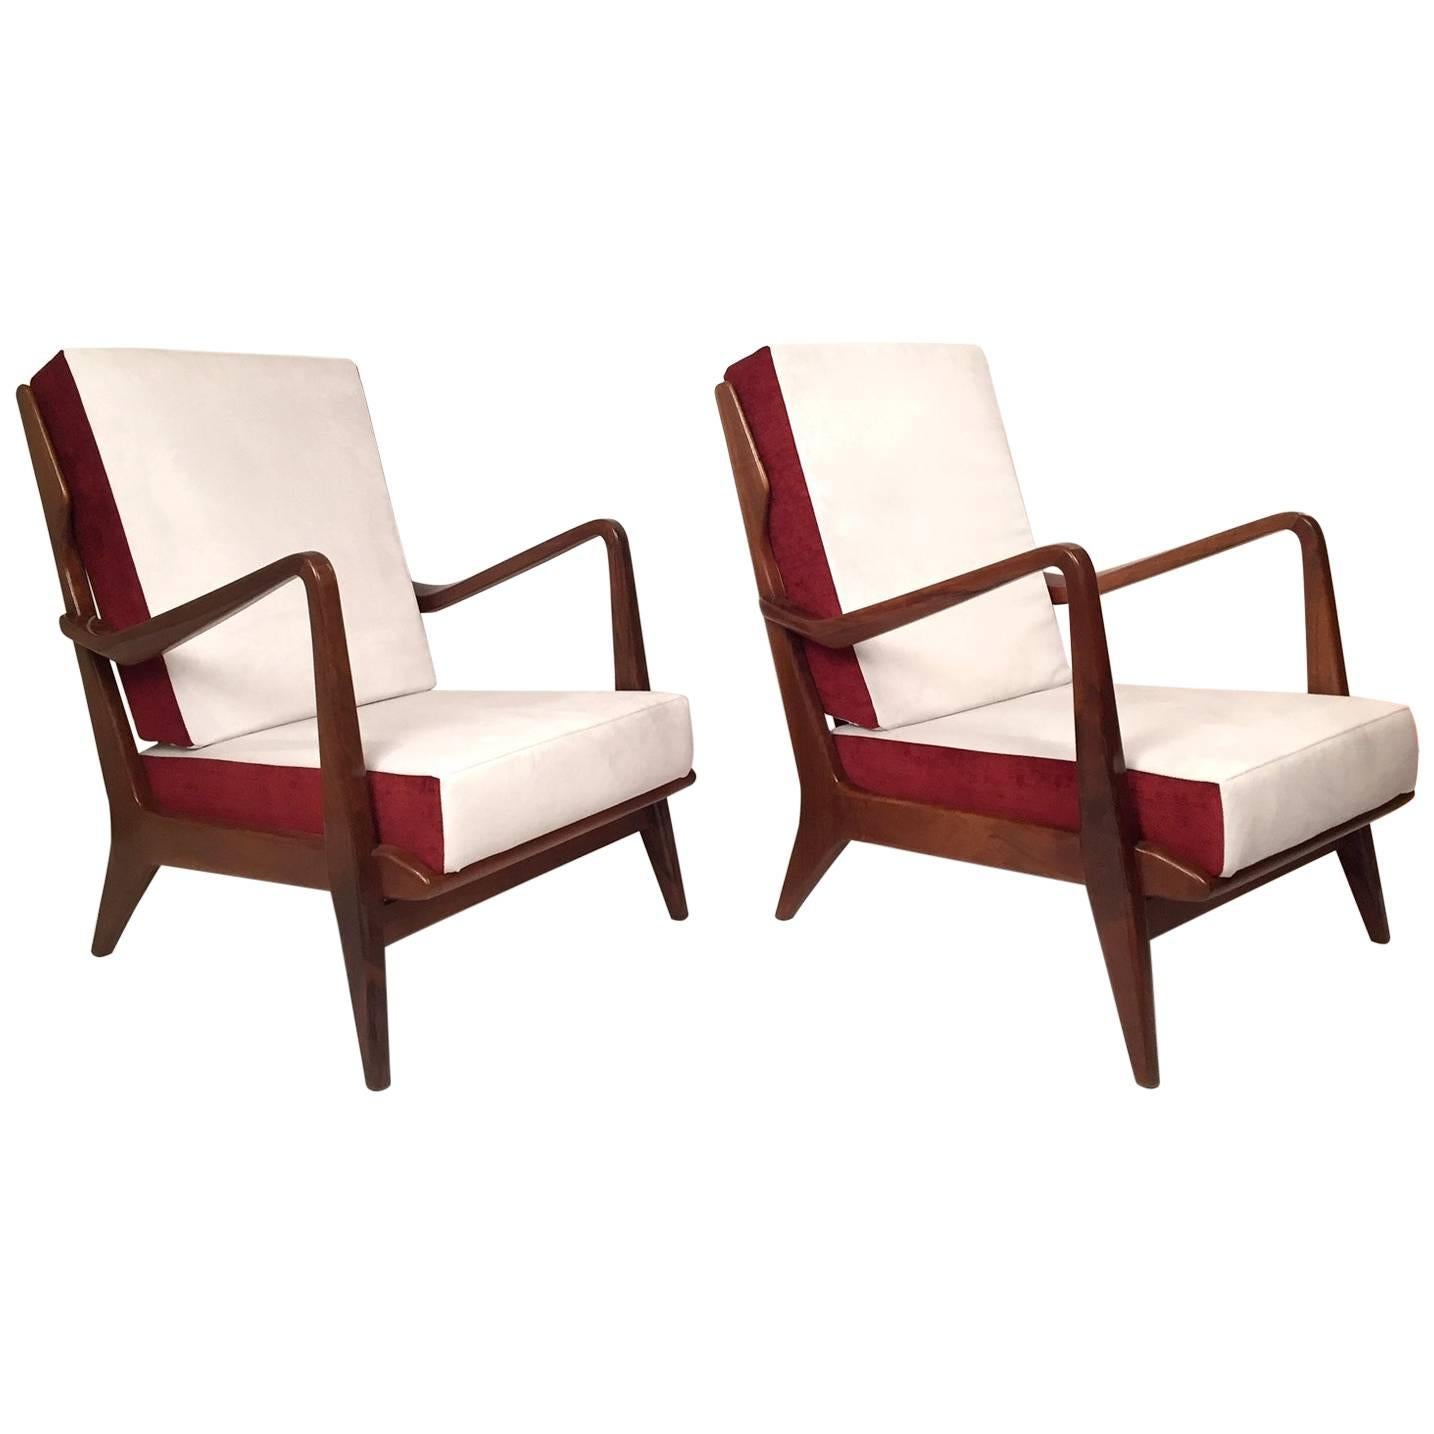 Pair of Gio Ponti Walnut Chairs Model No 516 for Cassina, 1950s